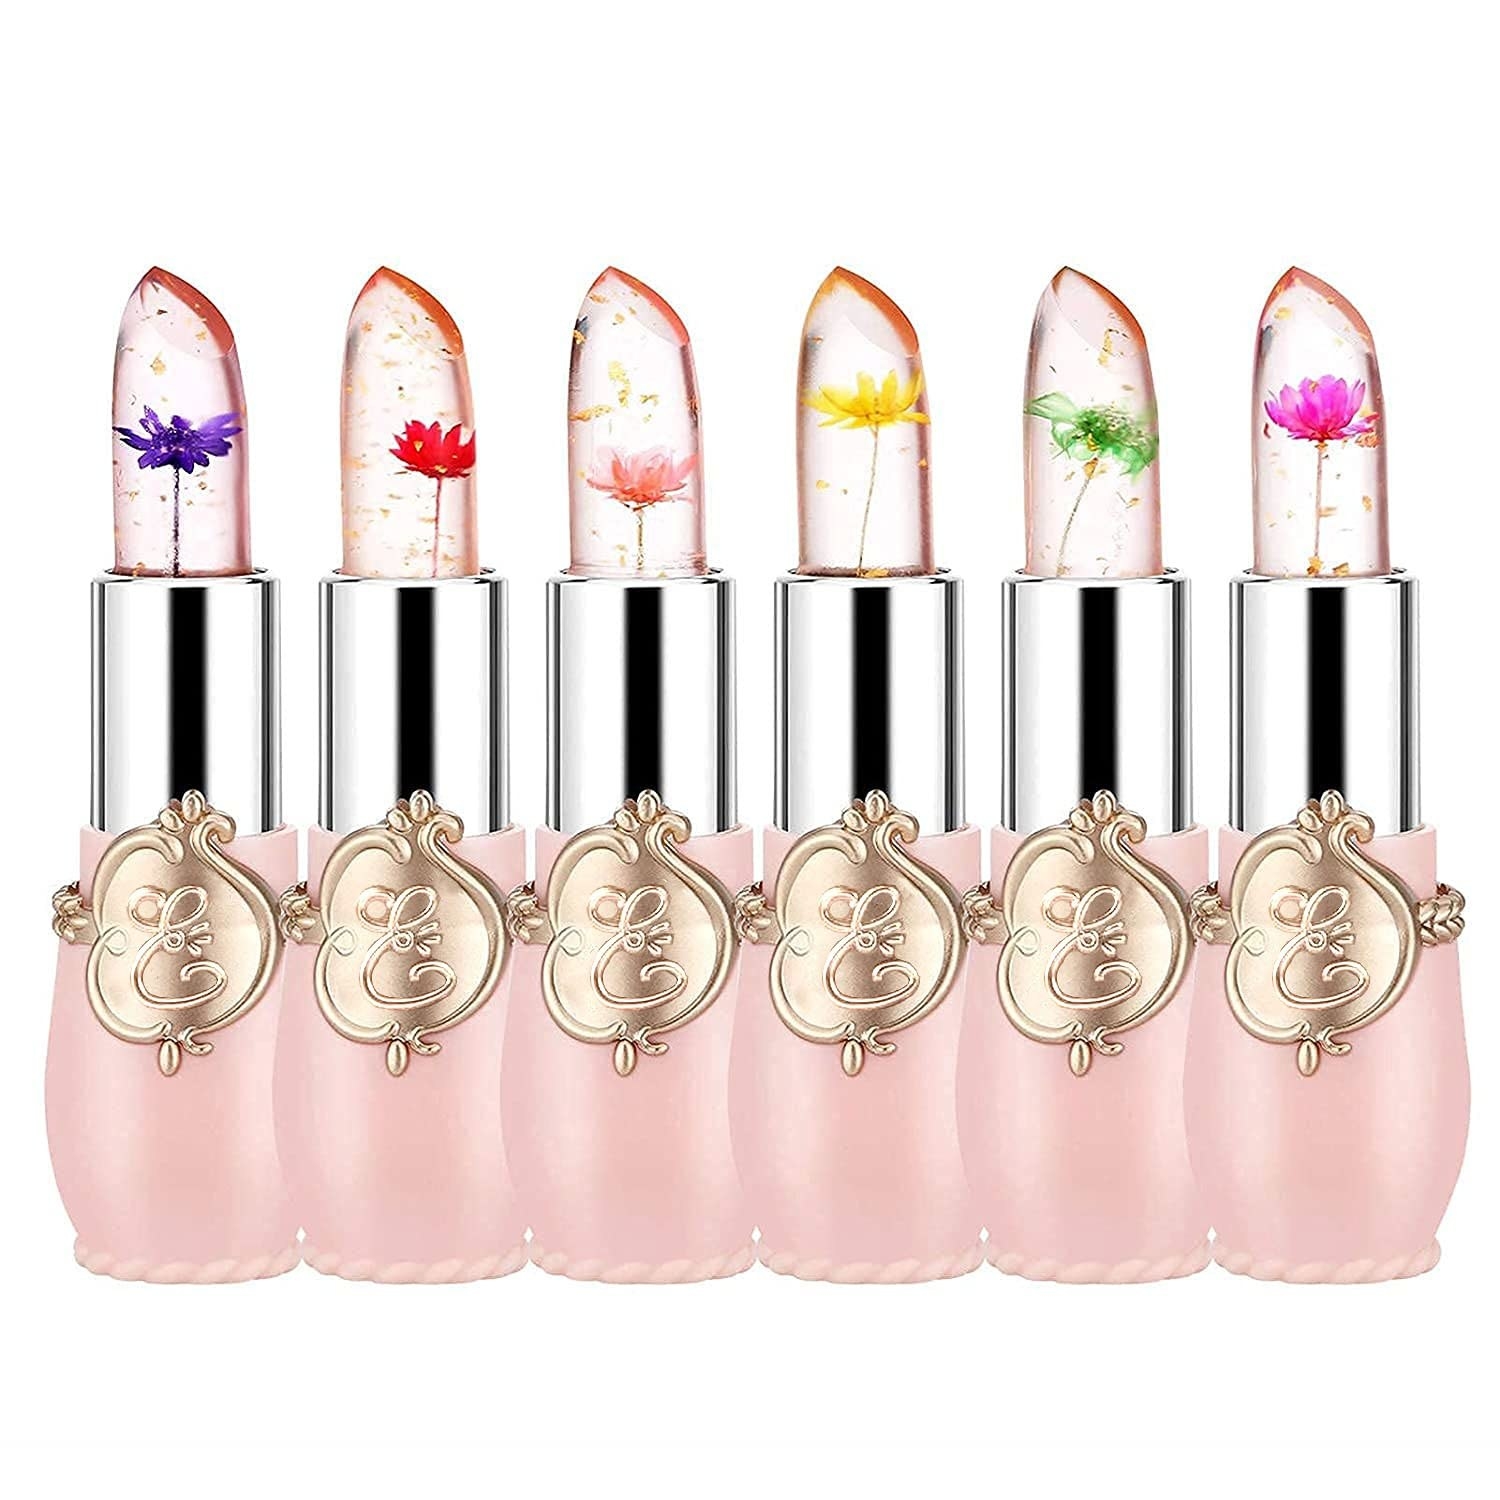 Six pink lipsticks with colorful flowers inside